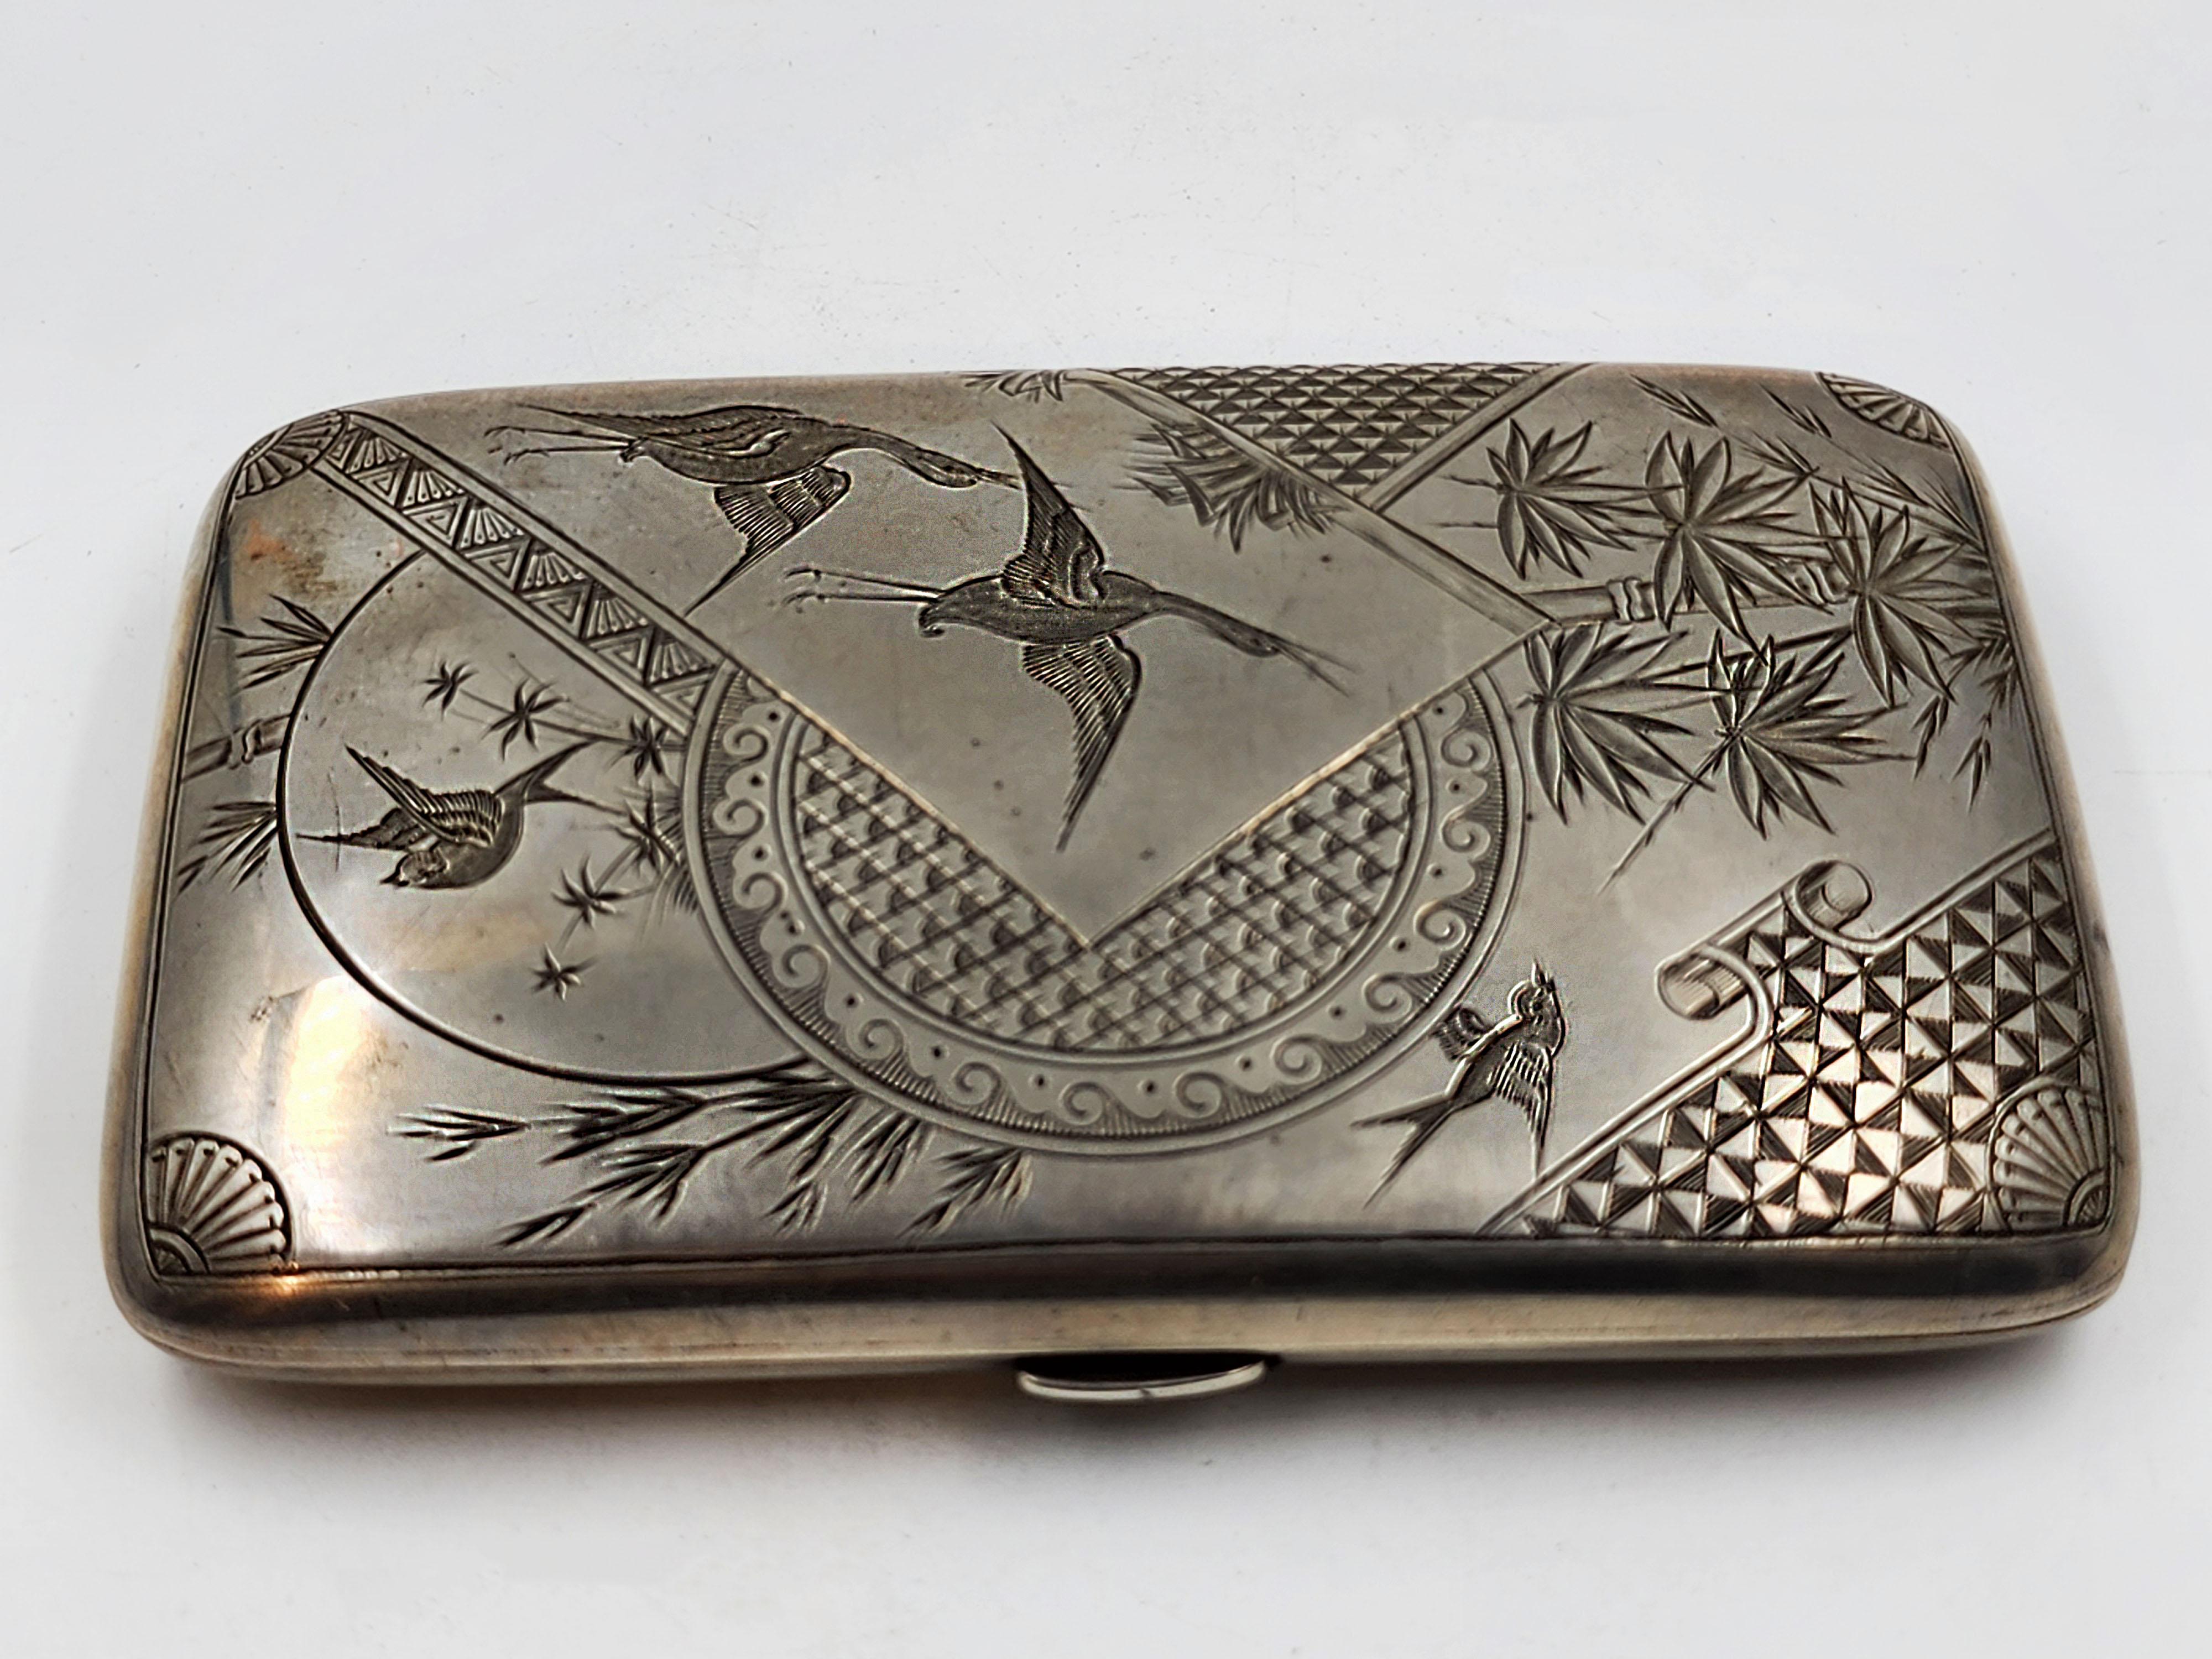 English silver and nickel snuff box, Birminhan, 19th century
This beautiful English silver cigar box, from the Victorian era, decorated with aesthetic taste. The eastern influence can be seen on both sides of the box with herons and birds etched